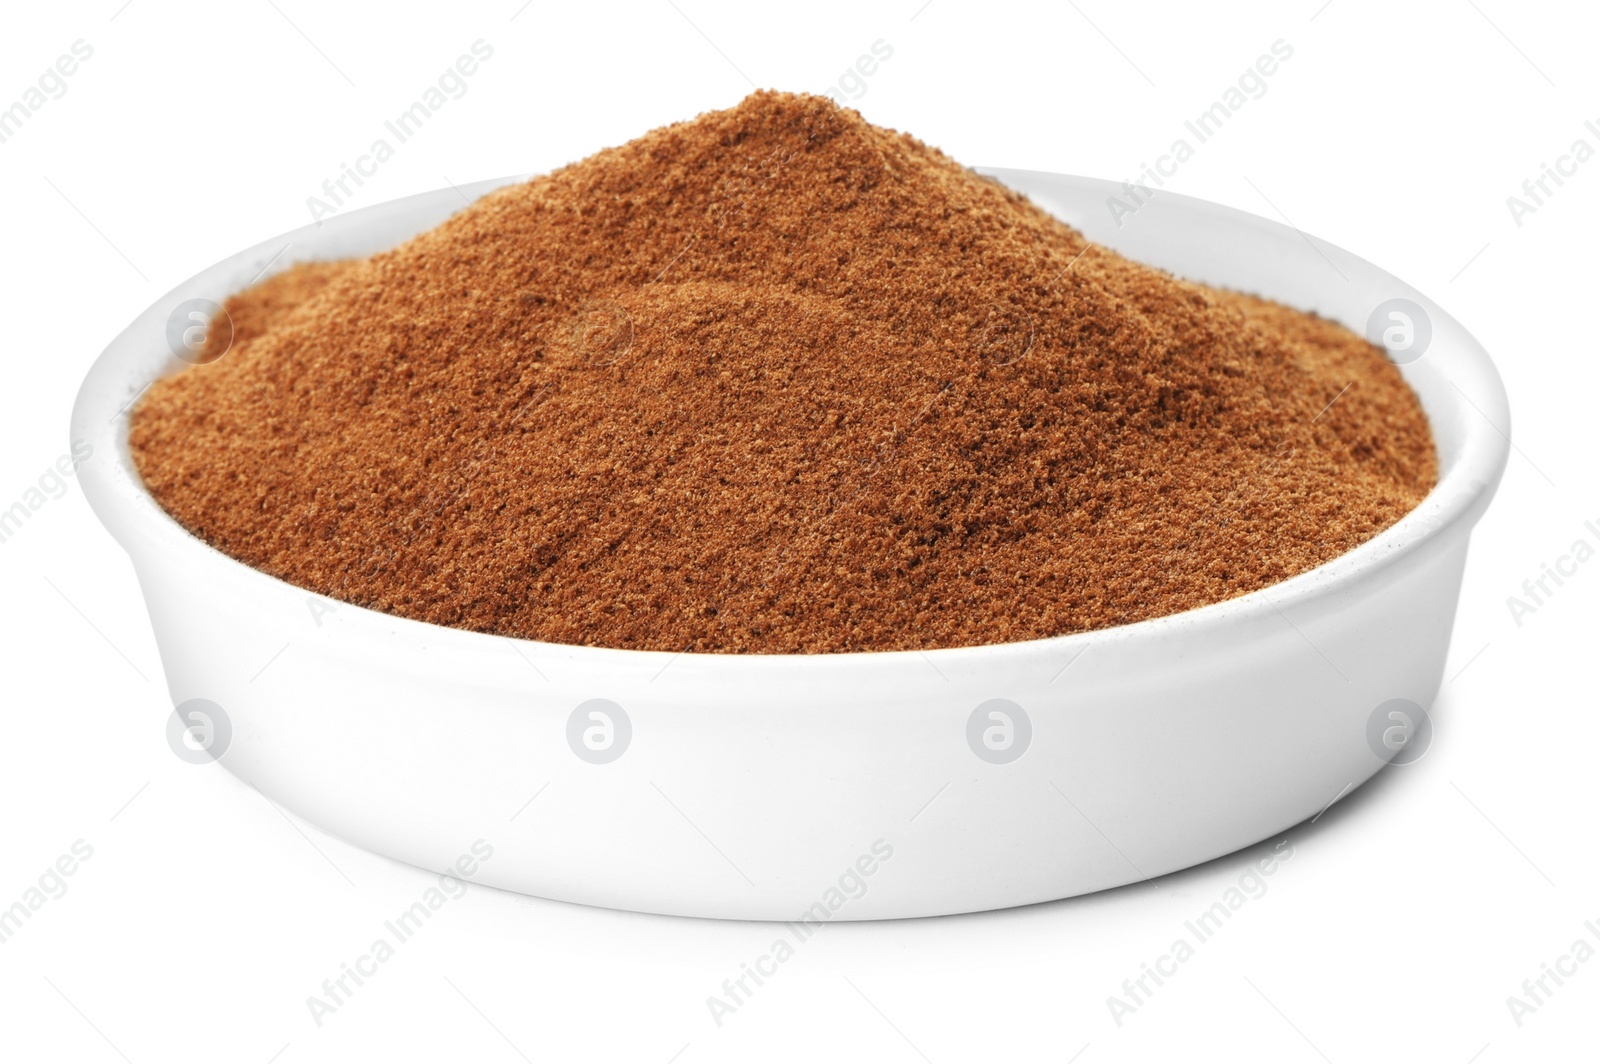 Photo of Plate of chicory powder on white background